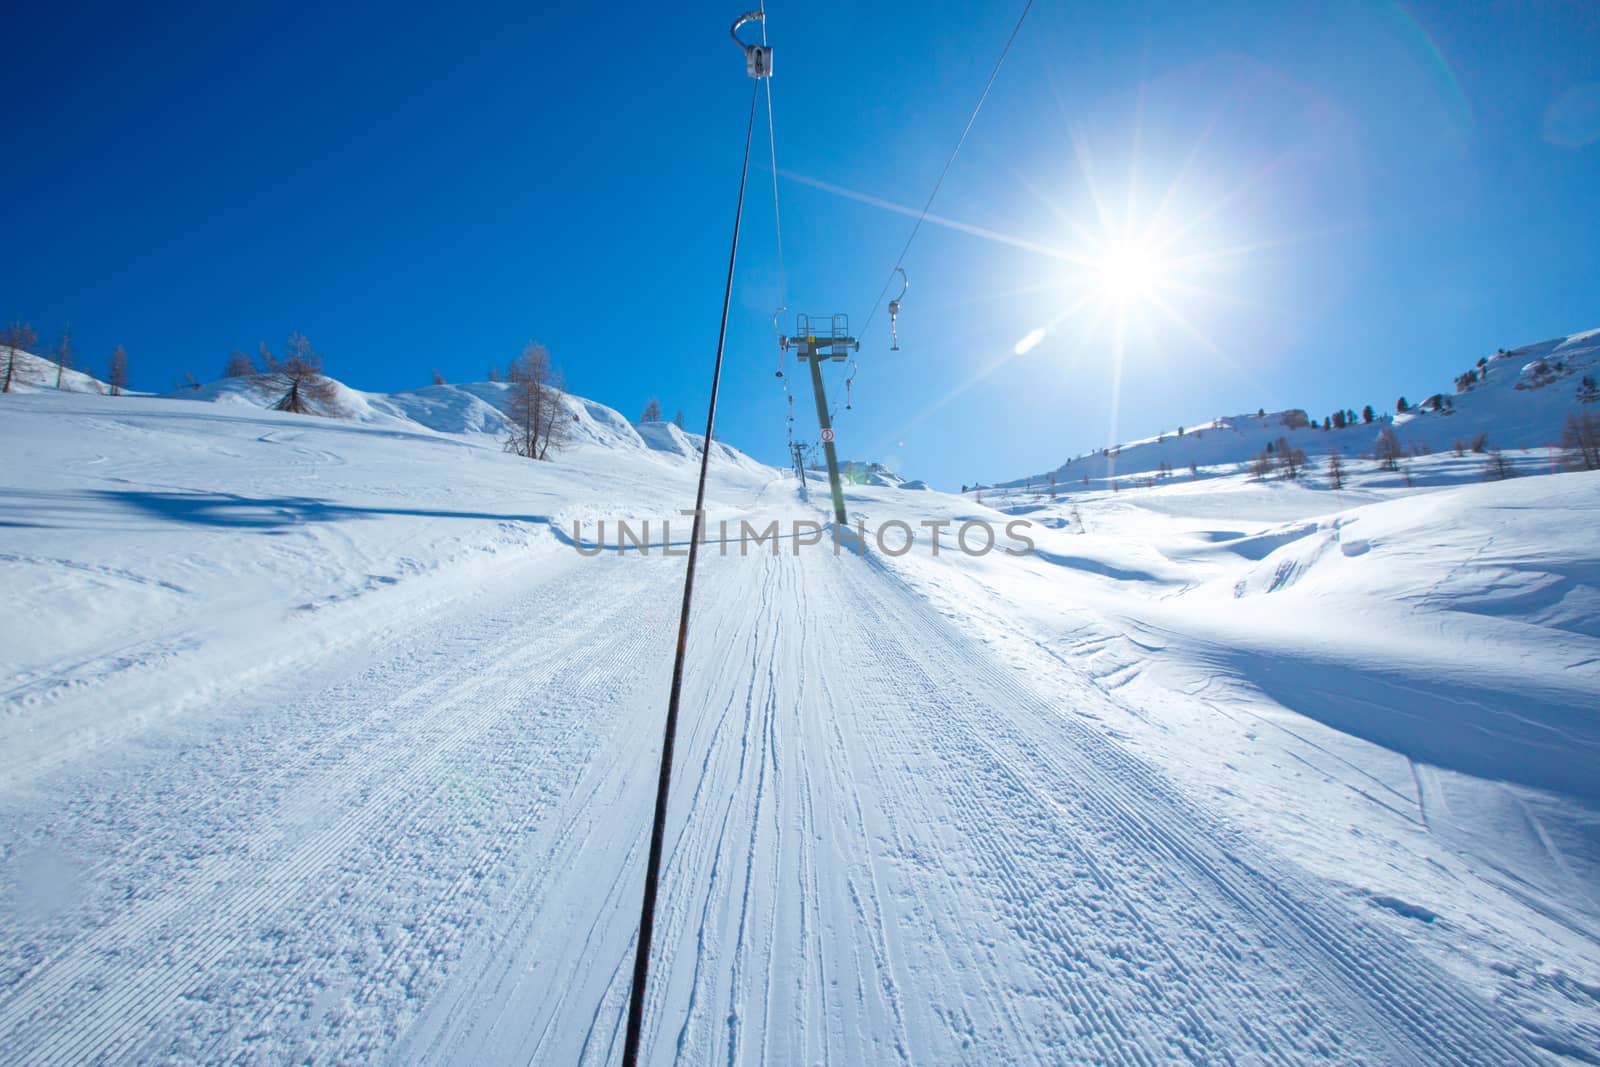 T bar ski lift for pulling skiers up the slope. Perfect winter landscape in European Alps Italy Cortina d'Ampezzo Col Gallina